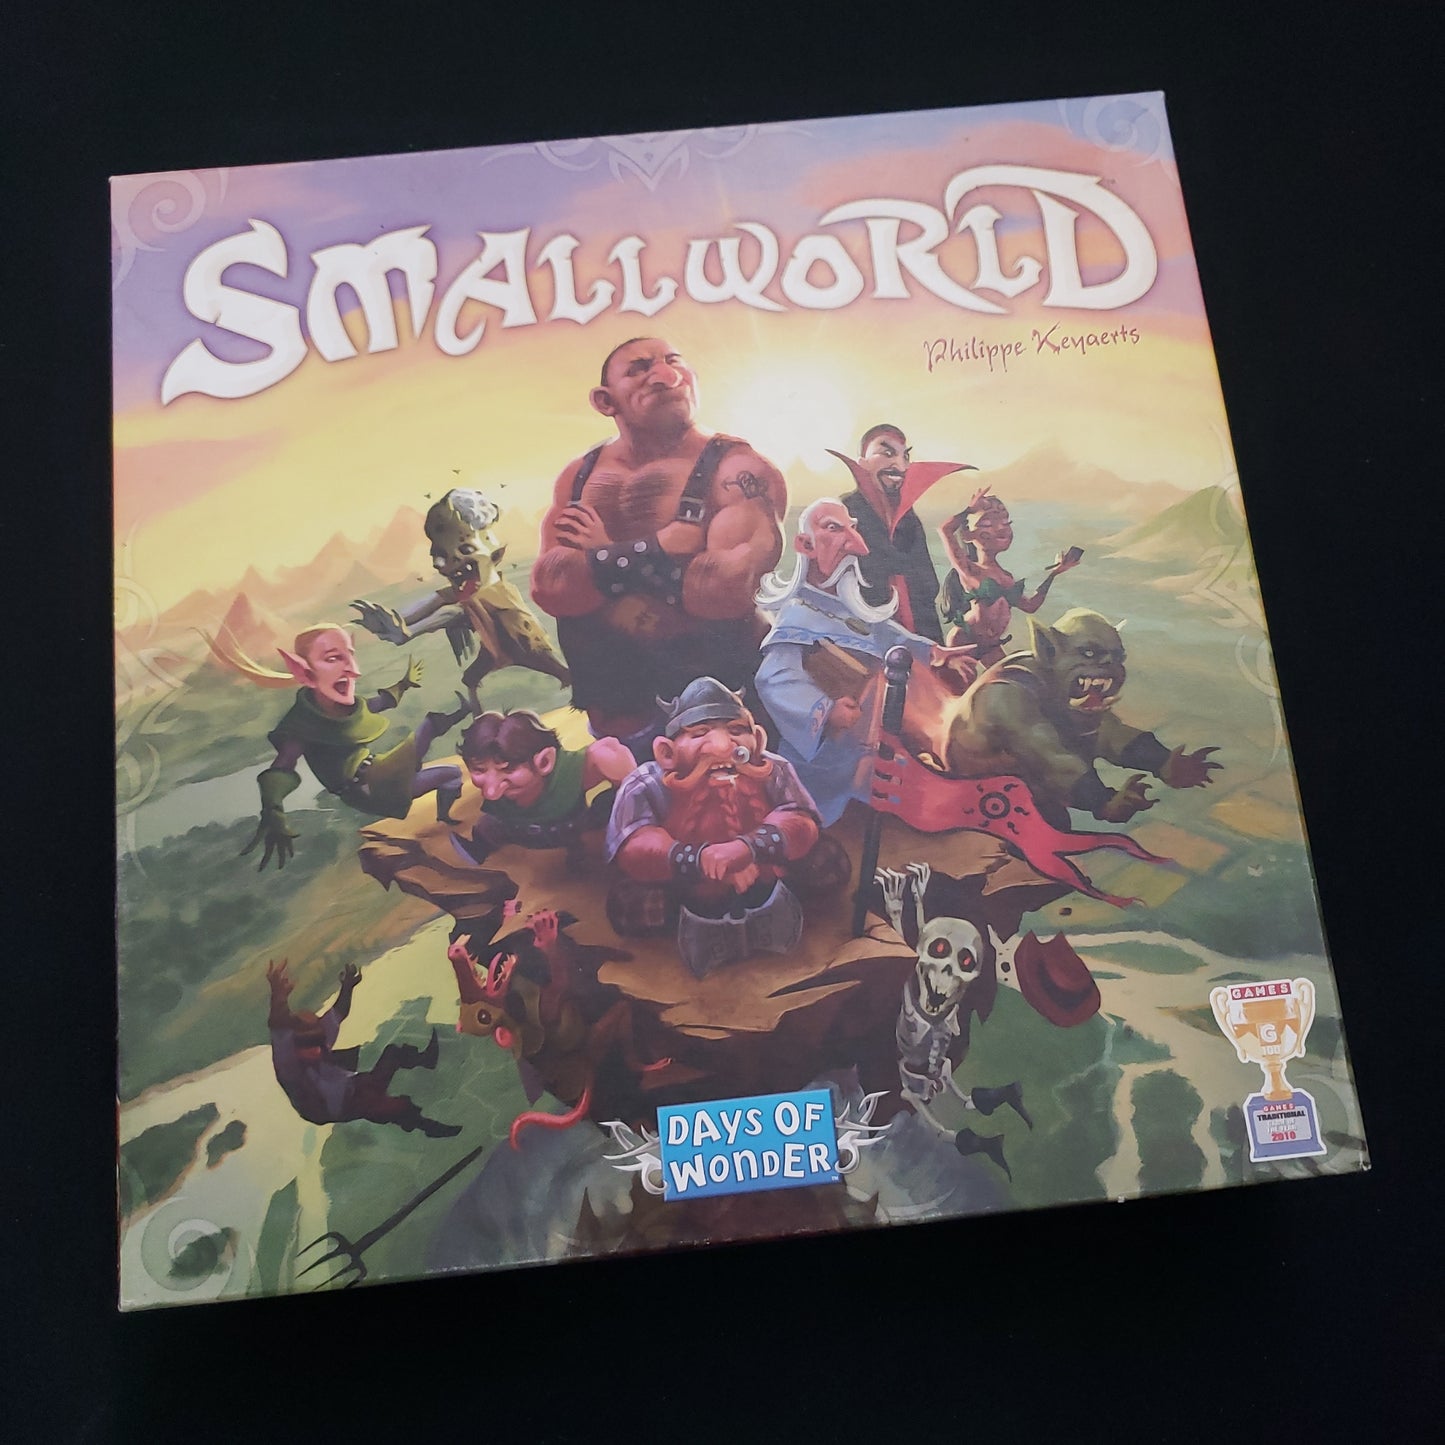 Image shows the front cover of the box of the Small World board game